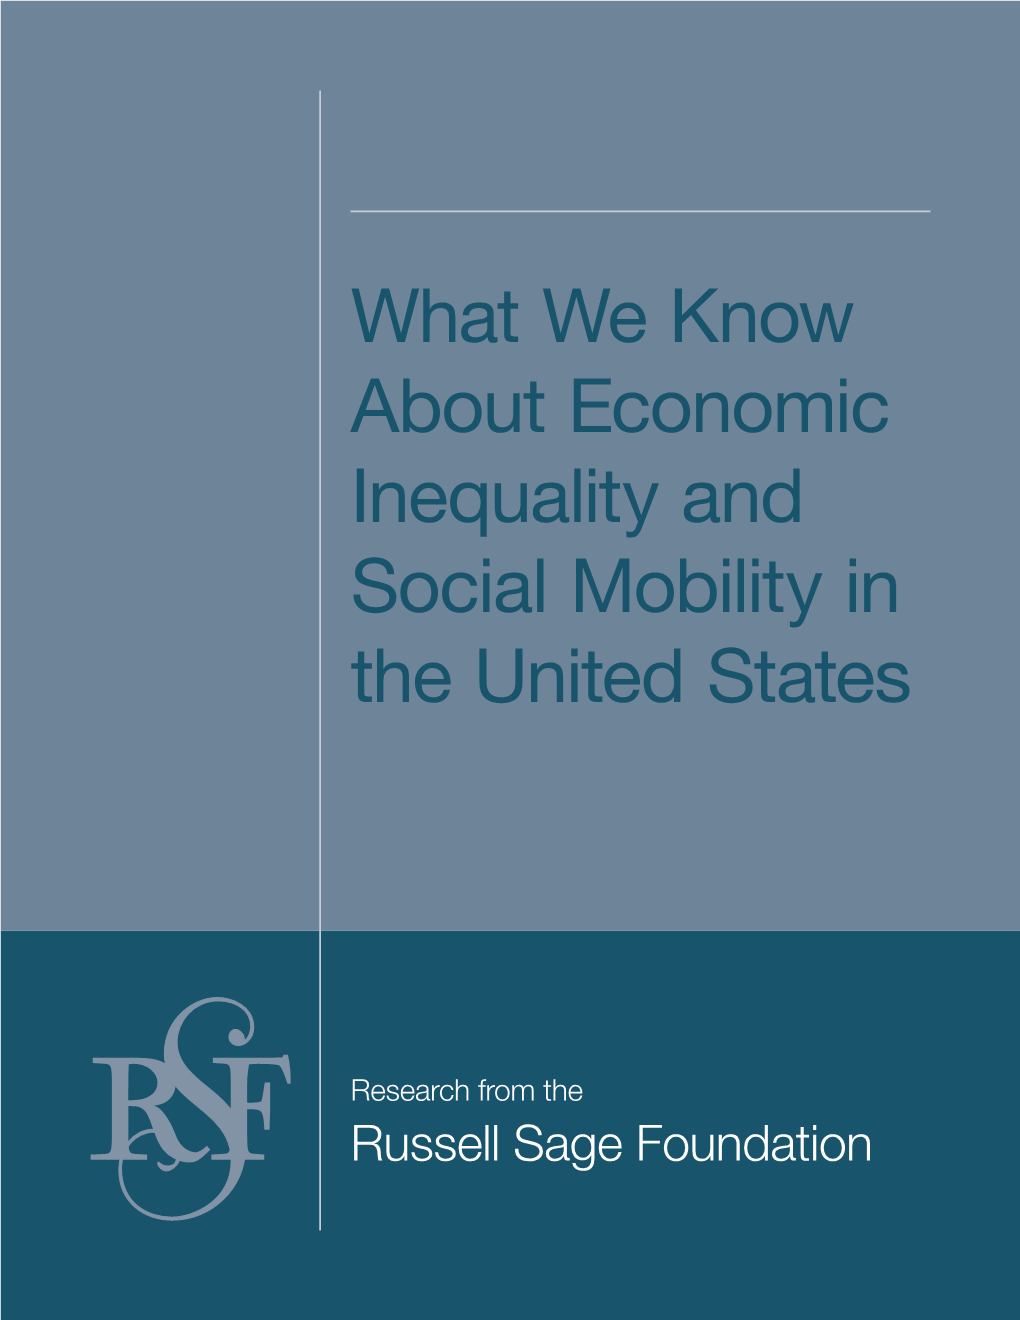 What We Know About Economic Inequality and Social Mobility in the United States